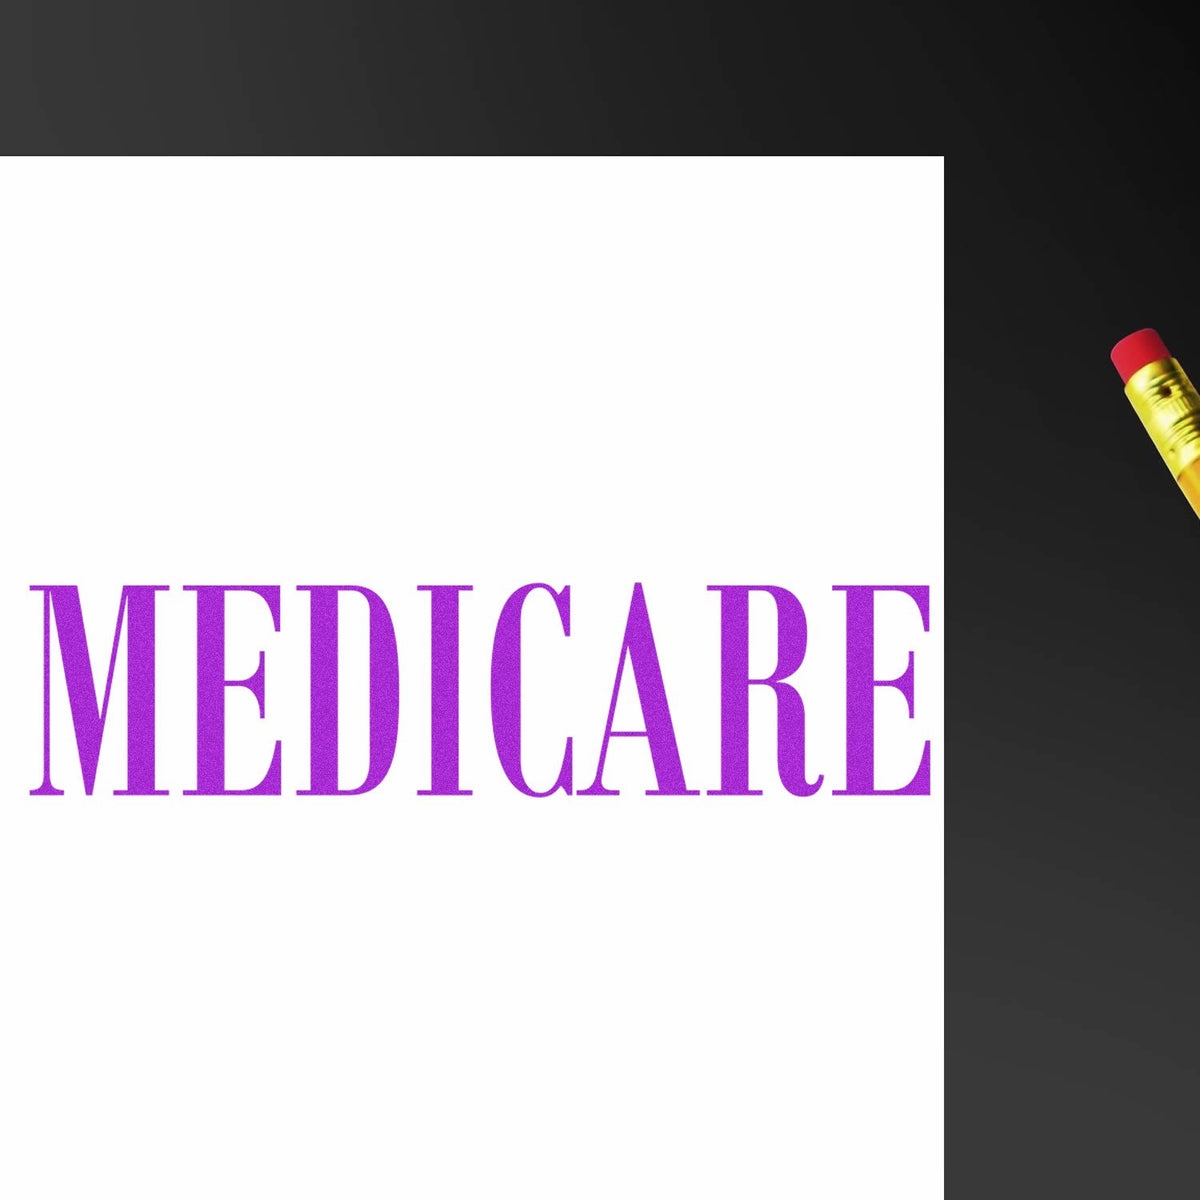 Medicare Rubber Stamp In Use